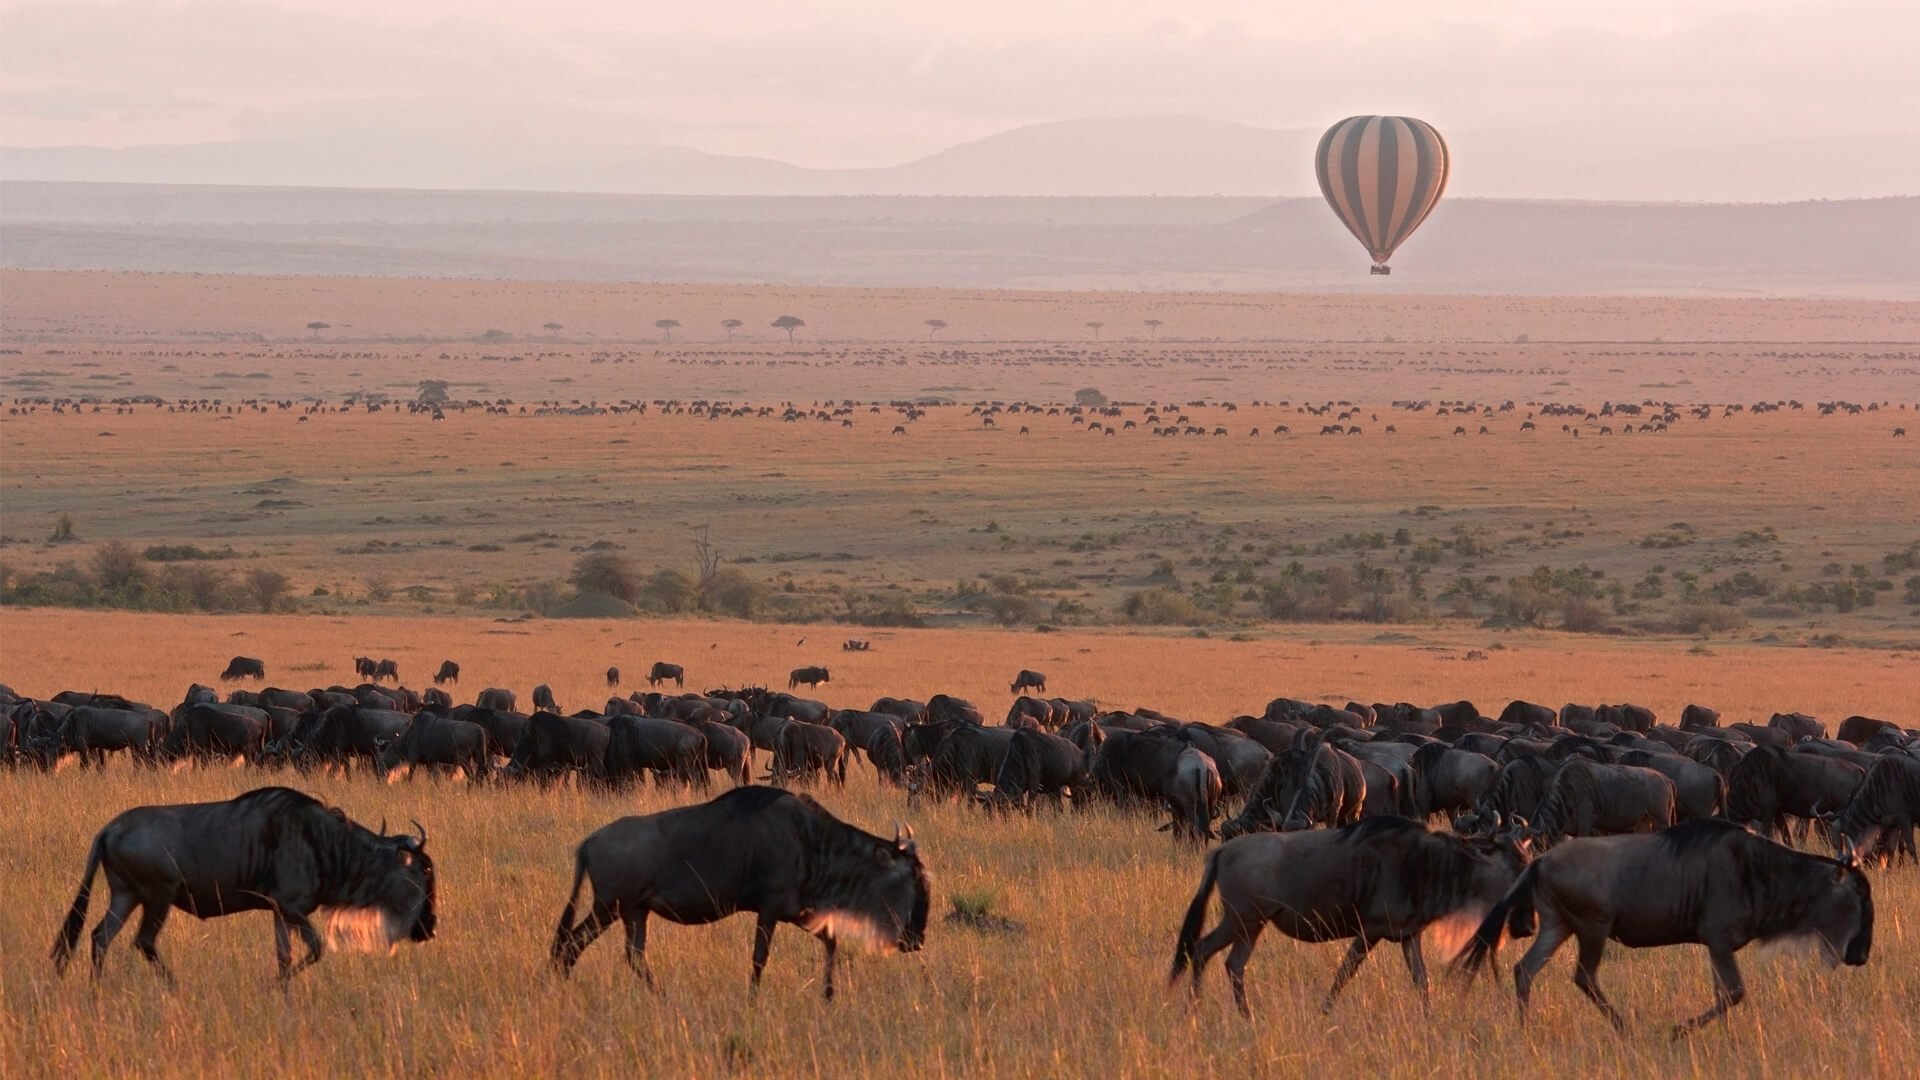 balloon-floating-over-wildebeest-from-the-great-migration.jpg